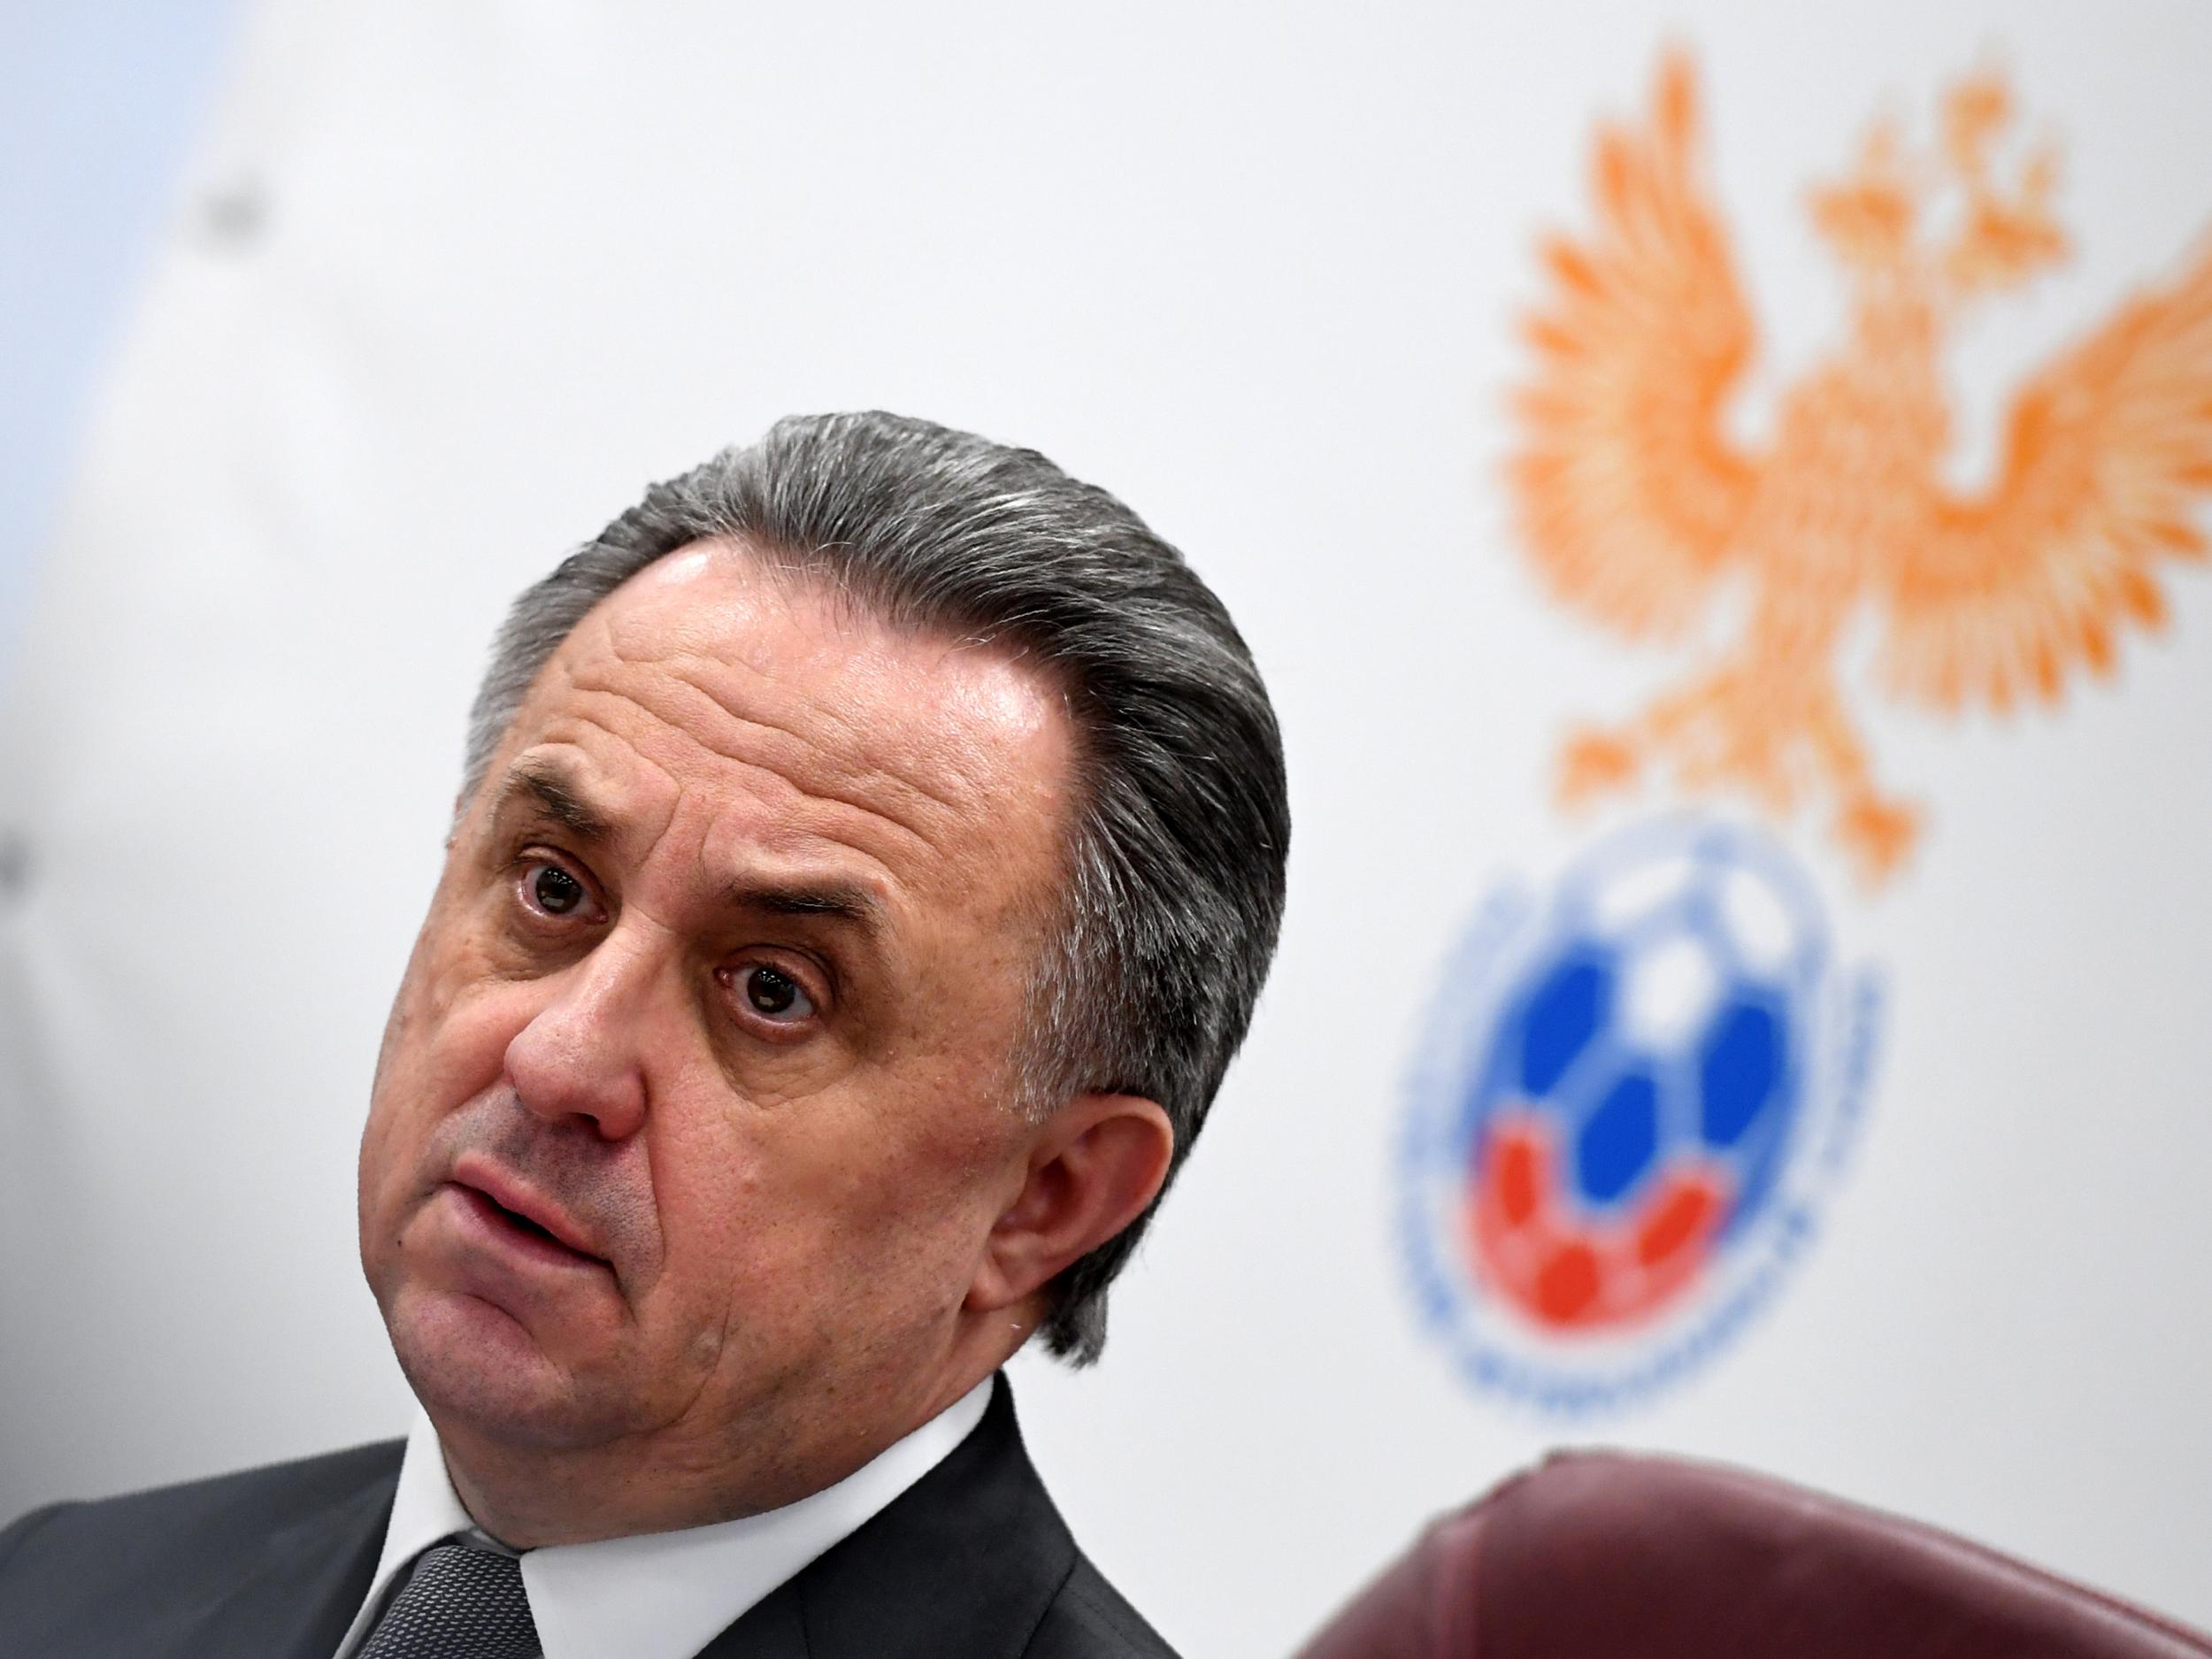 Mutko is worried by the low sales